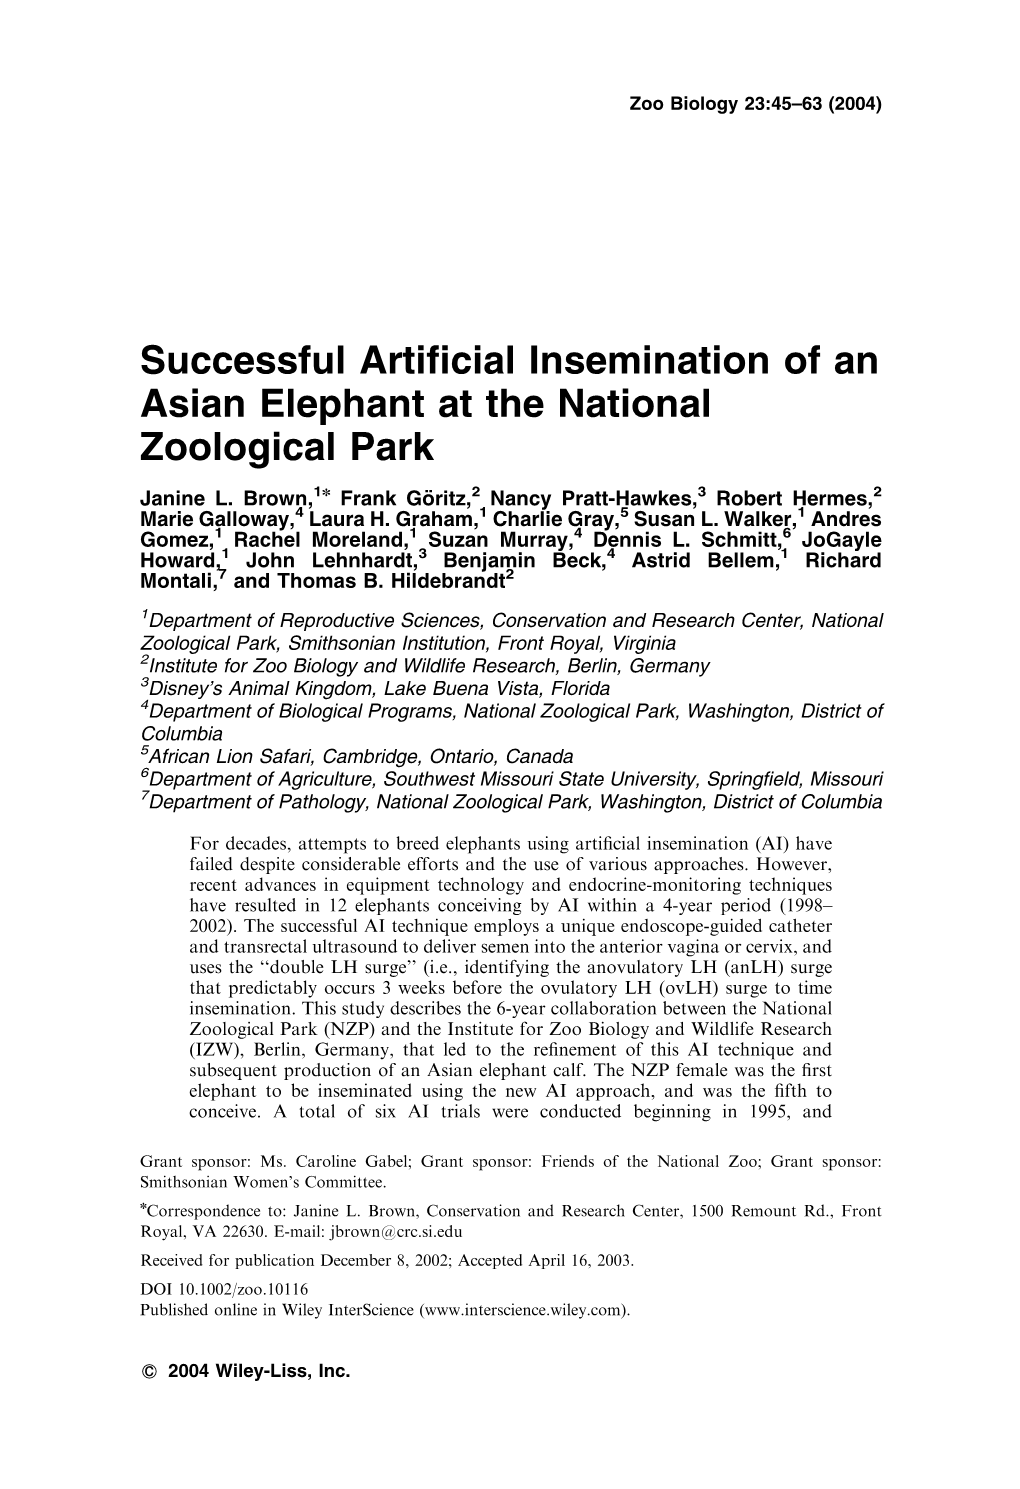 Successful Artificial Insemination of an Asian Elephant at the National